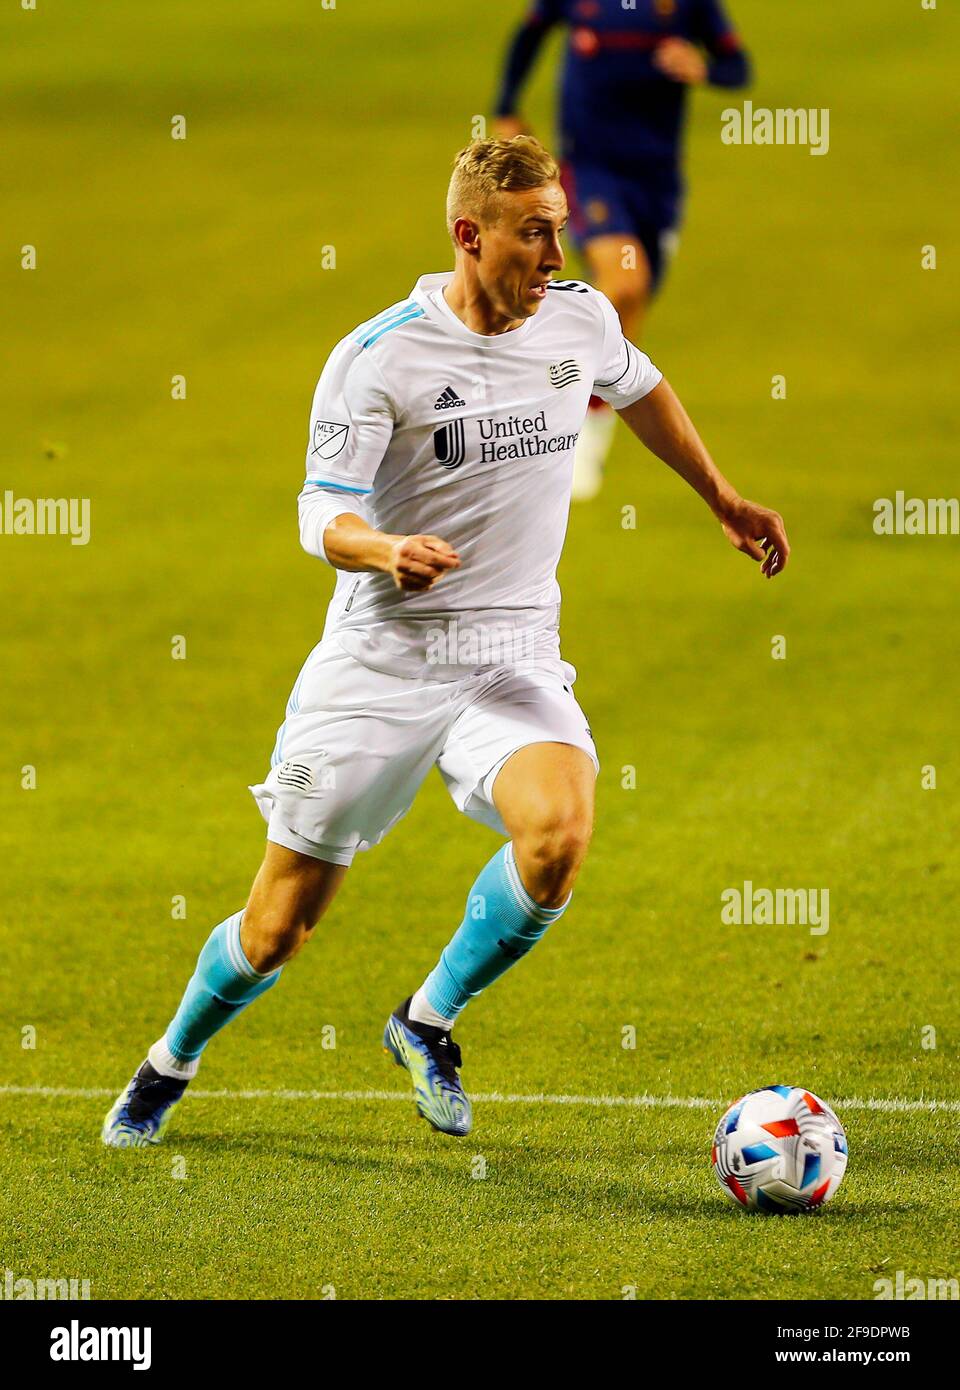 Chicago, USA, 17 April 2021. Major League Soccer (MLS) New England Revolution face the Chicago Fire FC at Soldier Field in Chicago, IL, USA. Match ended 2-2. Credit: Tony Gadomski / All Sport Imaging / Alamy Live News Stock Photo